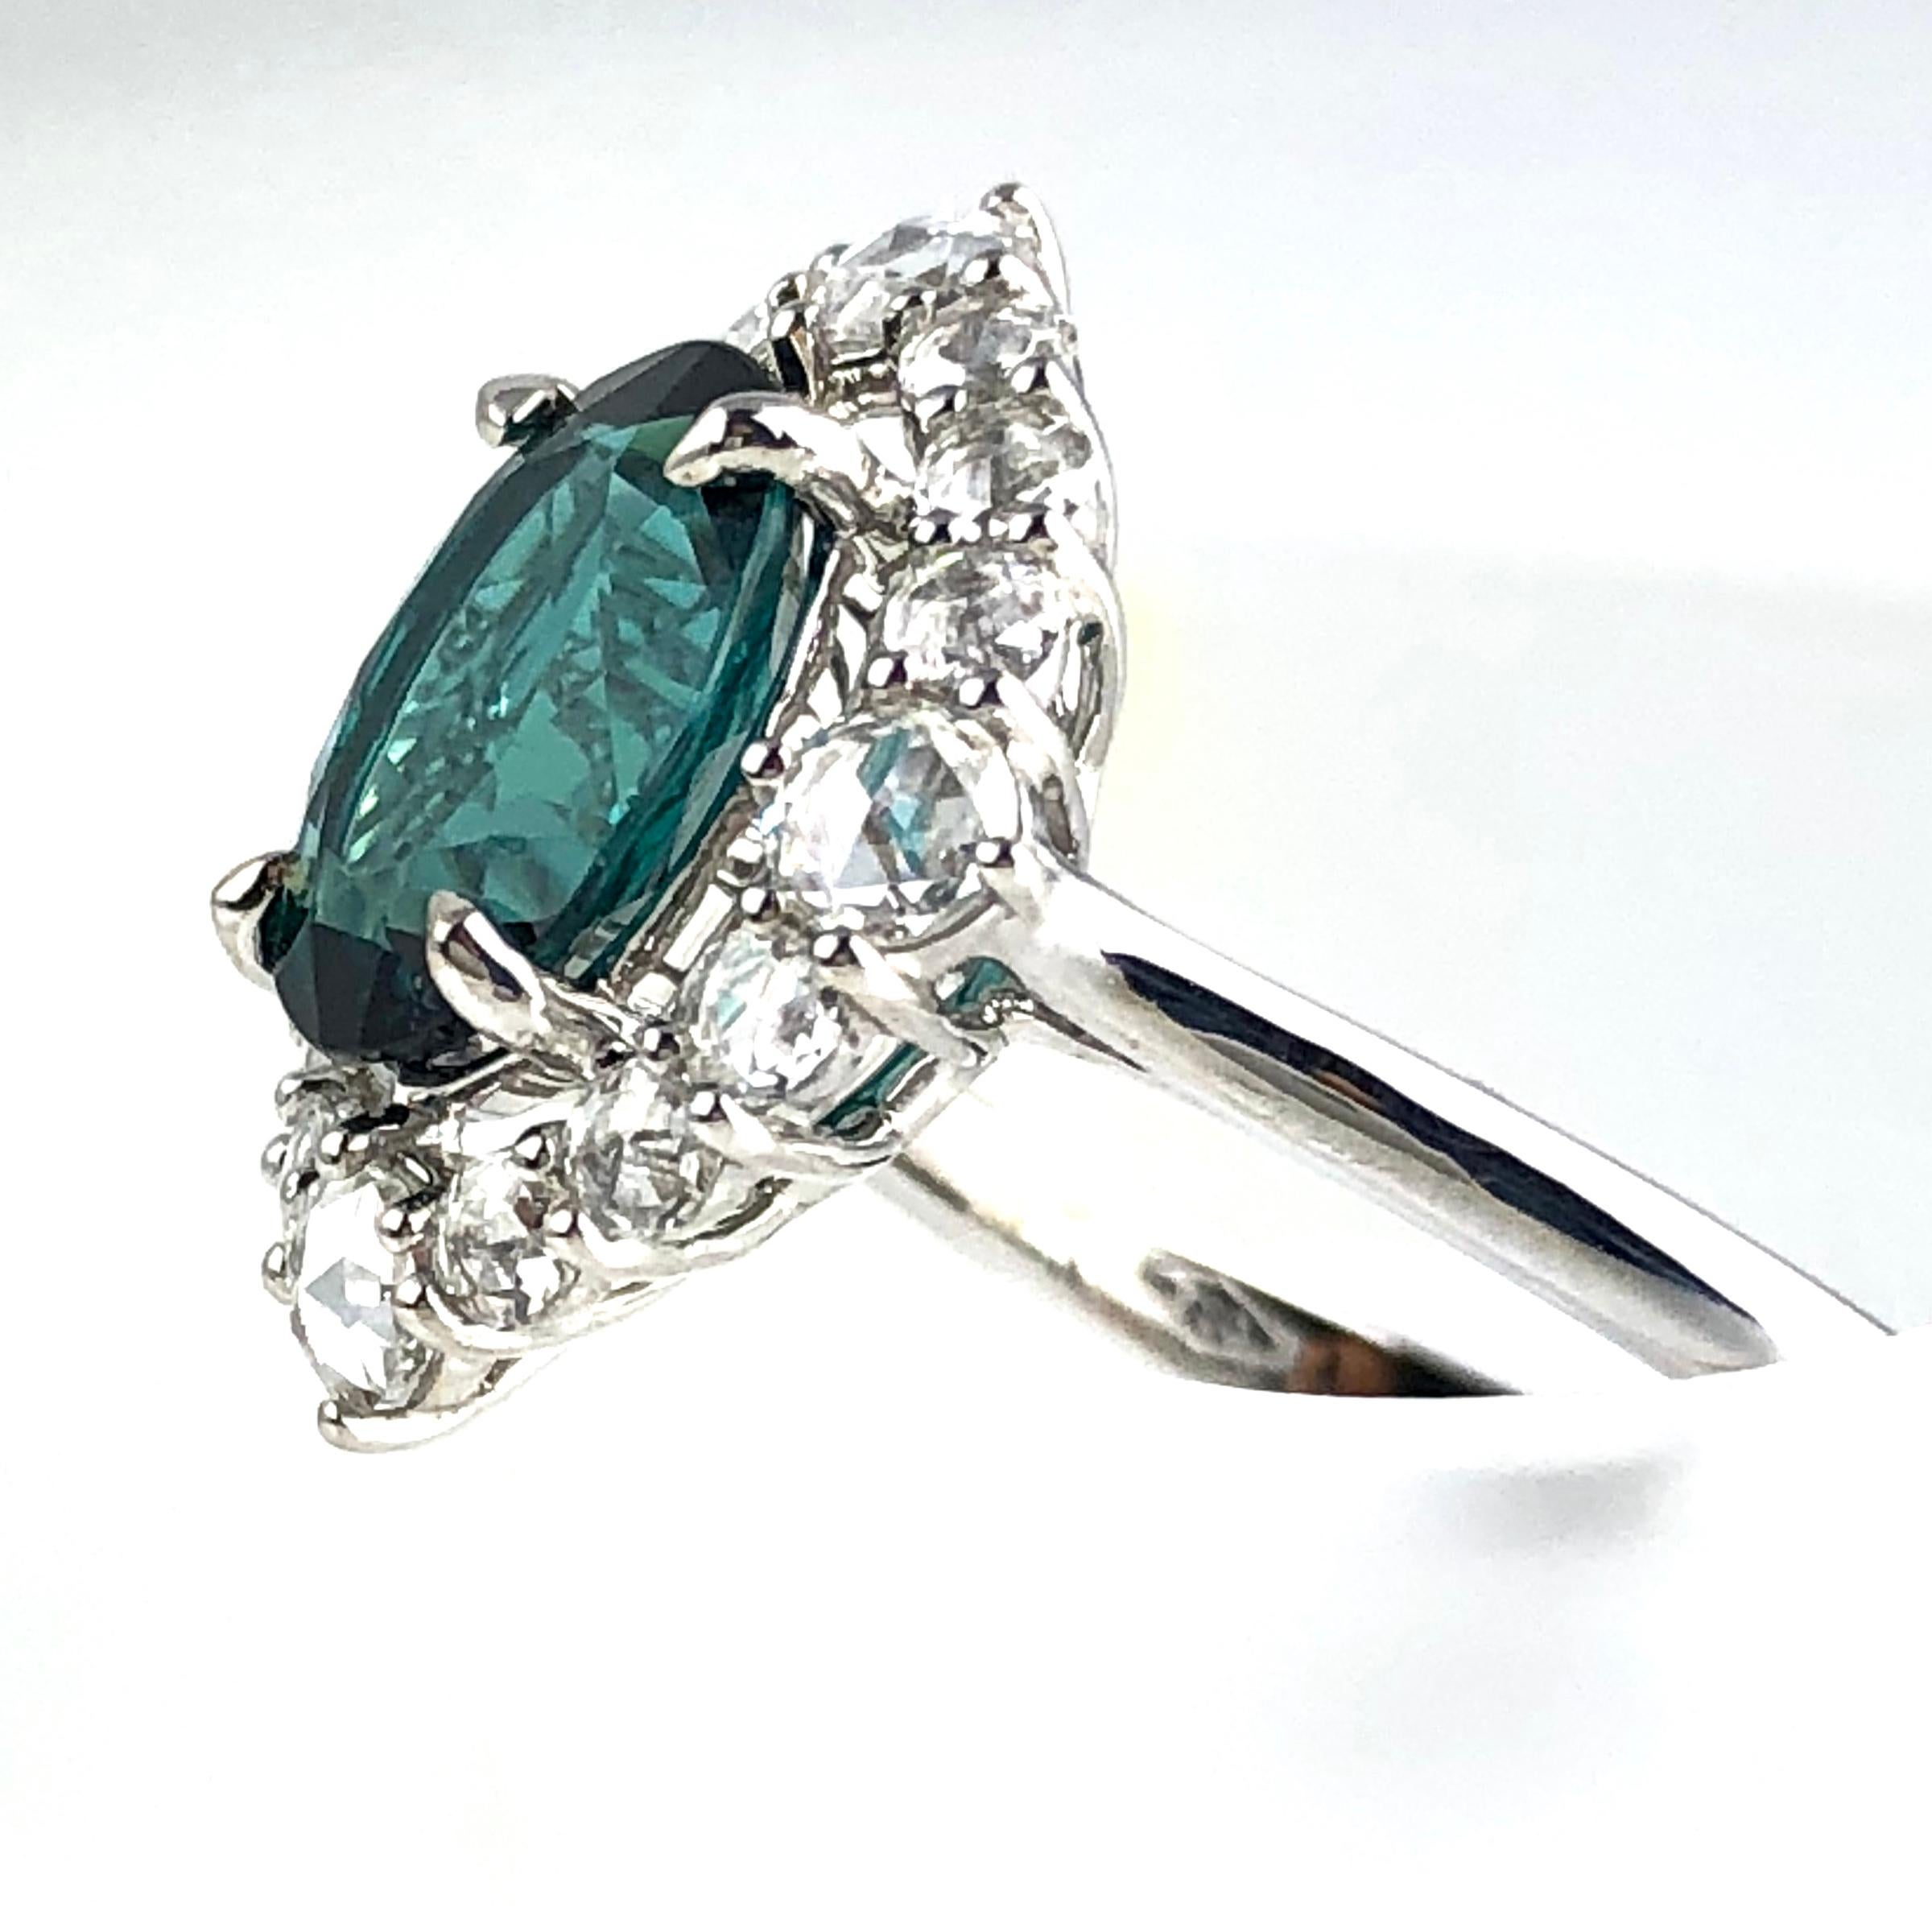 Elegance meets extravagance in this resplendent ring, featuring a GIA Certified 1.81 carat oval-cut blue-green Tourmaline at its heart, encircled by 0.62 carats of dazzling white diamonds. With every angle, this ring exudes a mesmerizing radiance